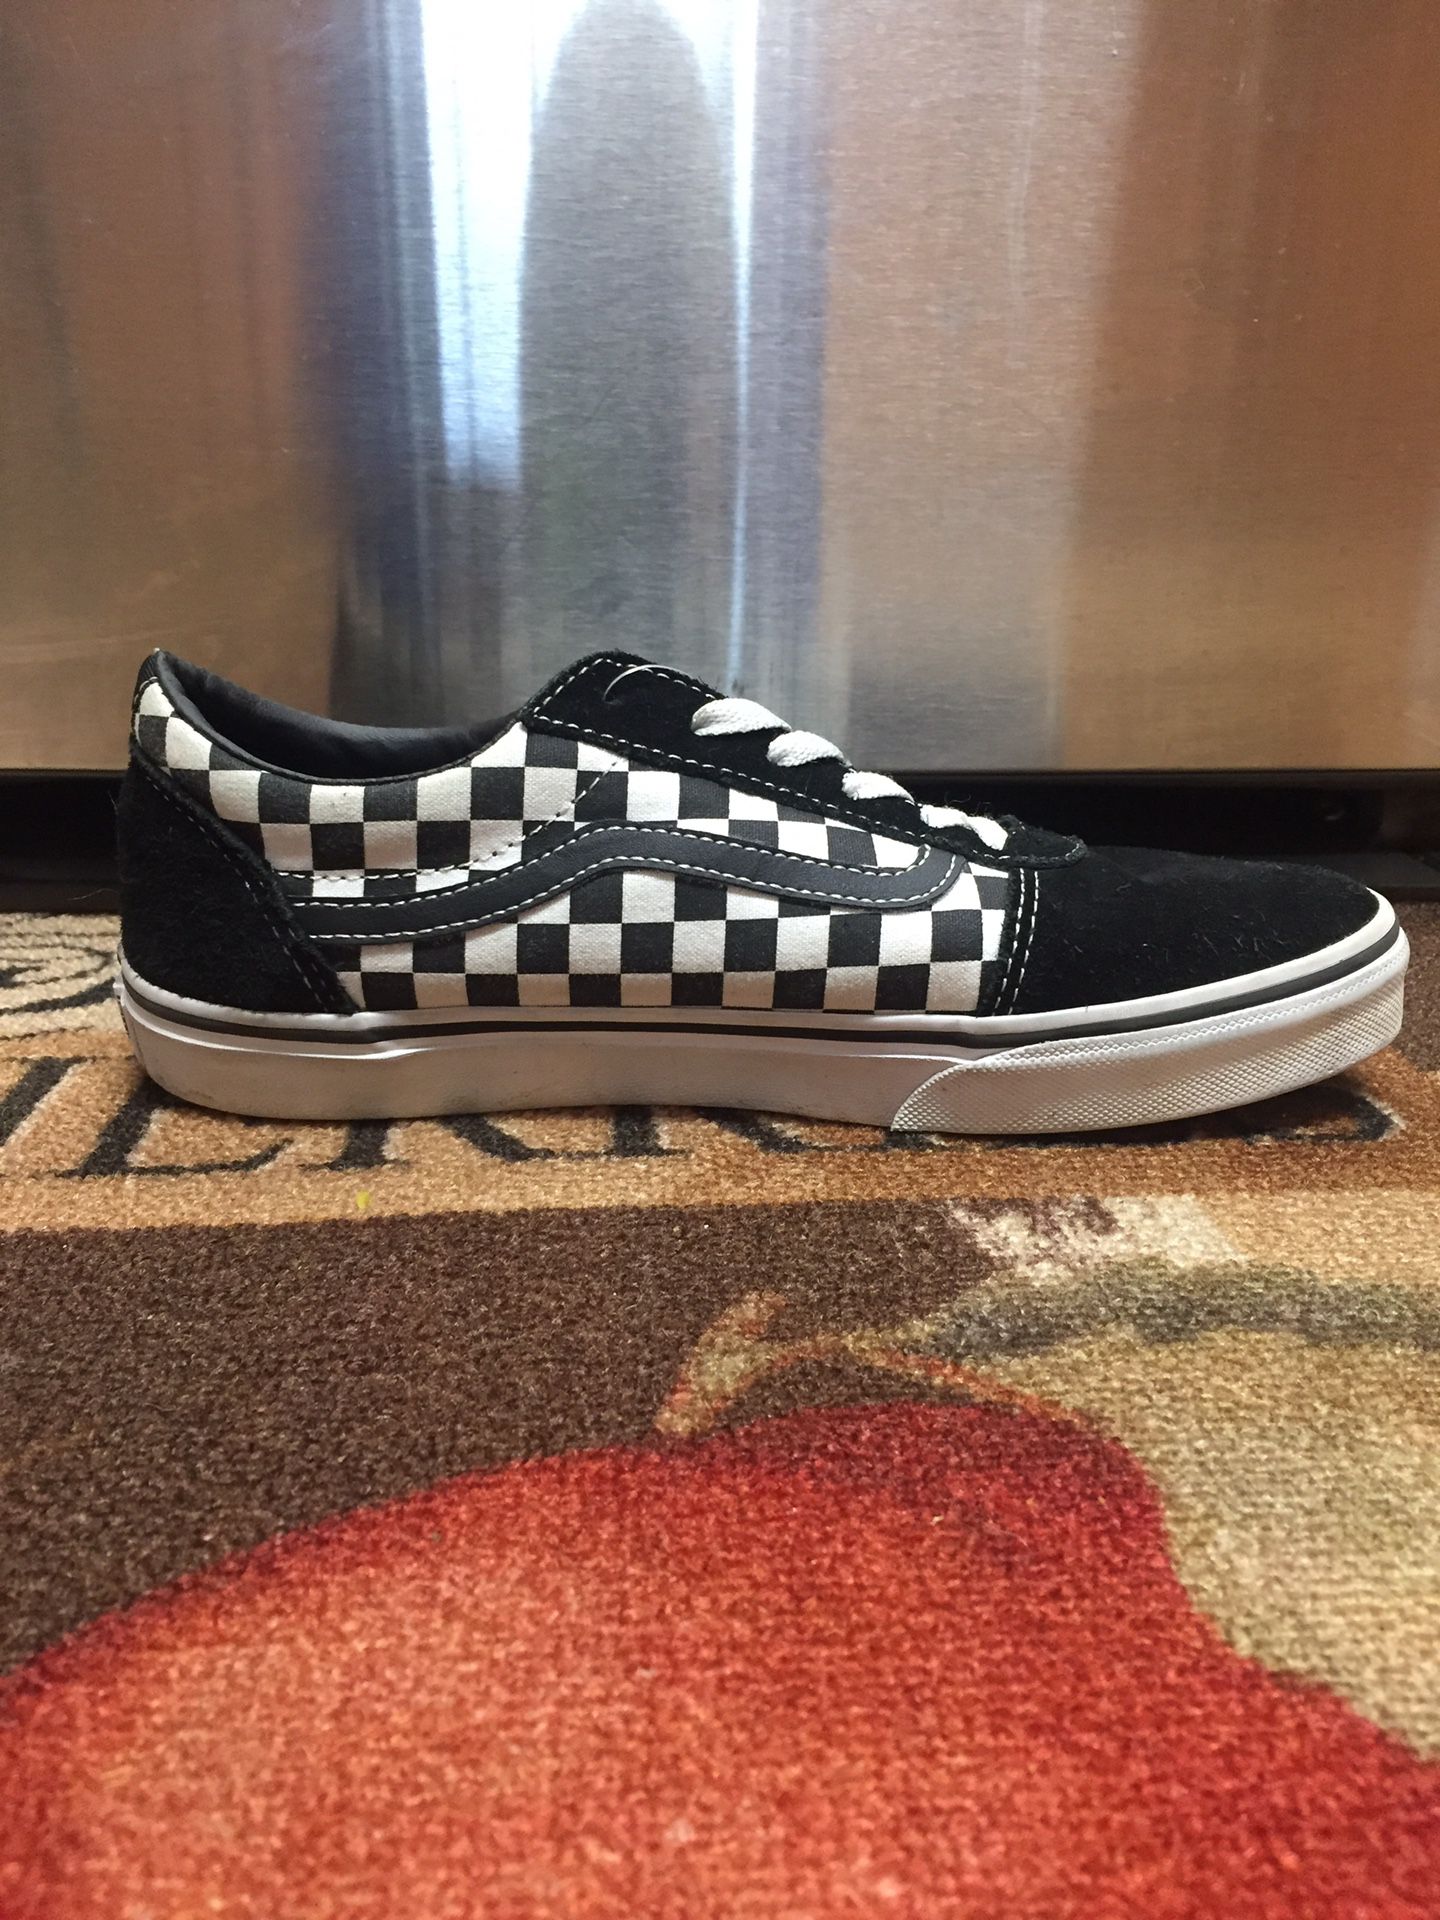 Black and White low top checkered Vans